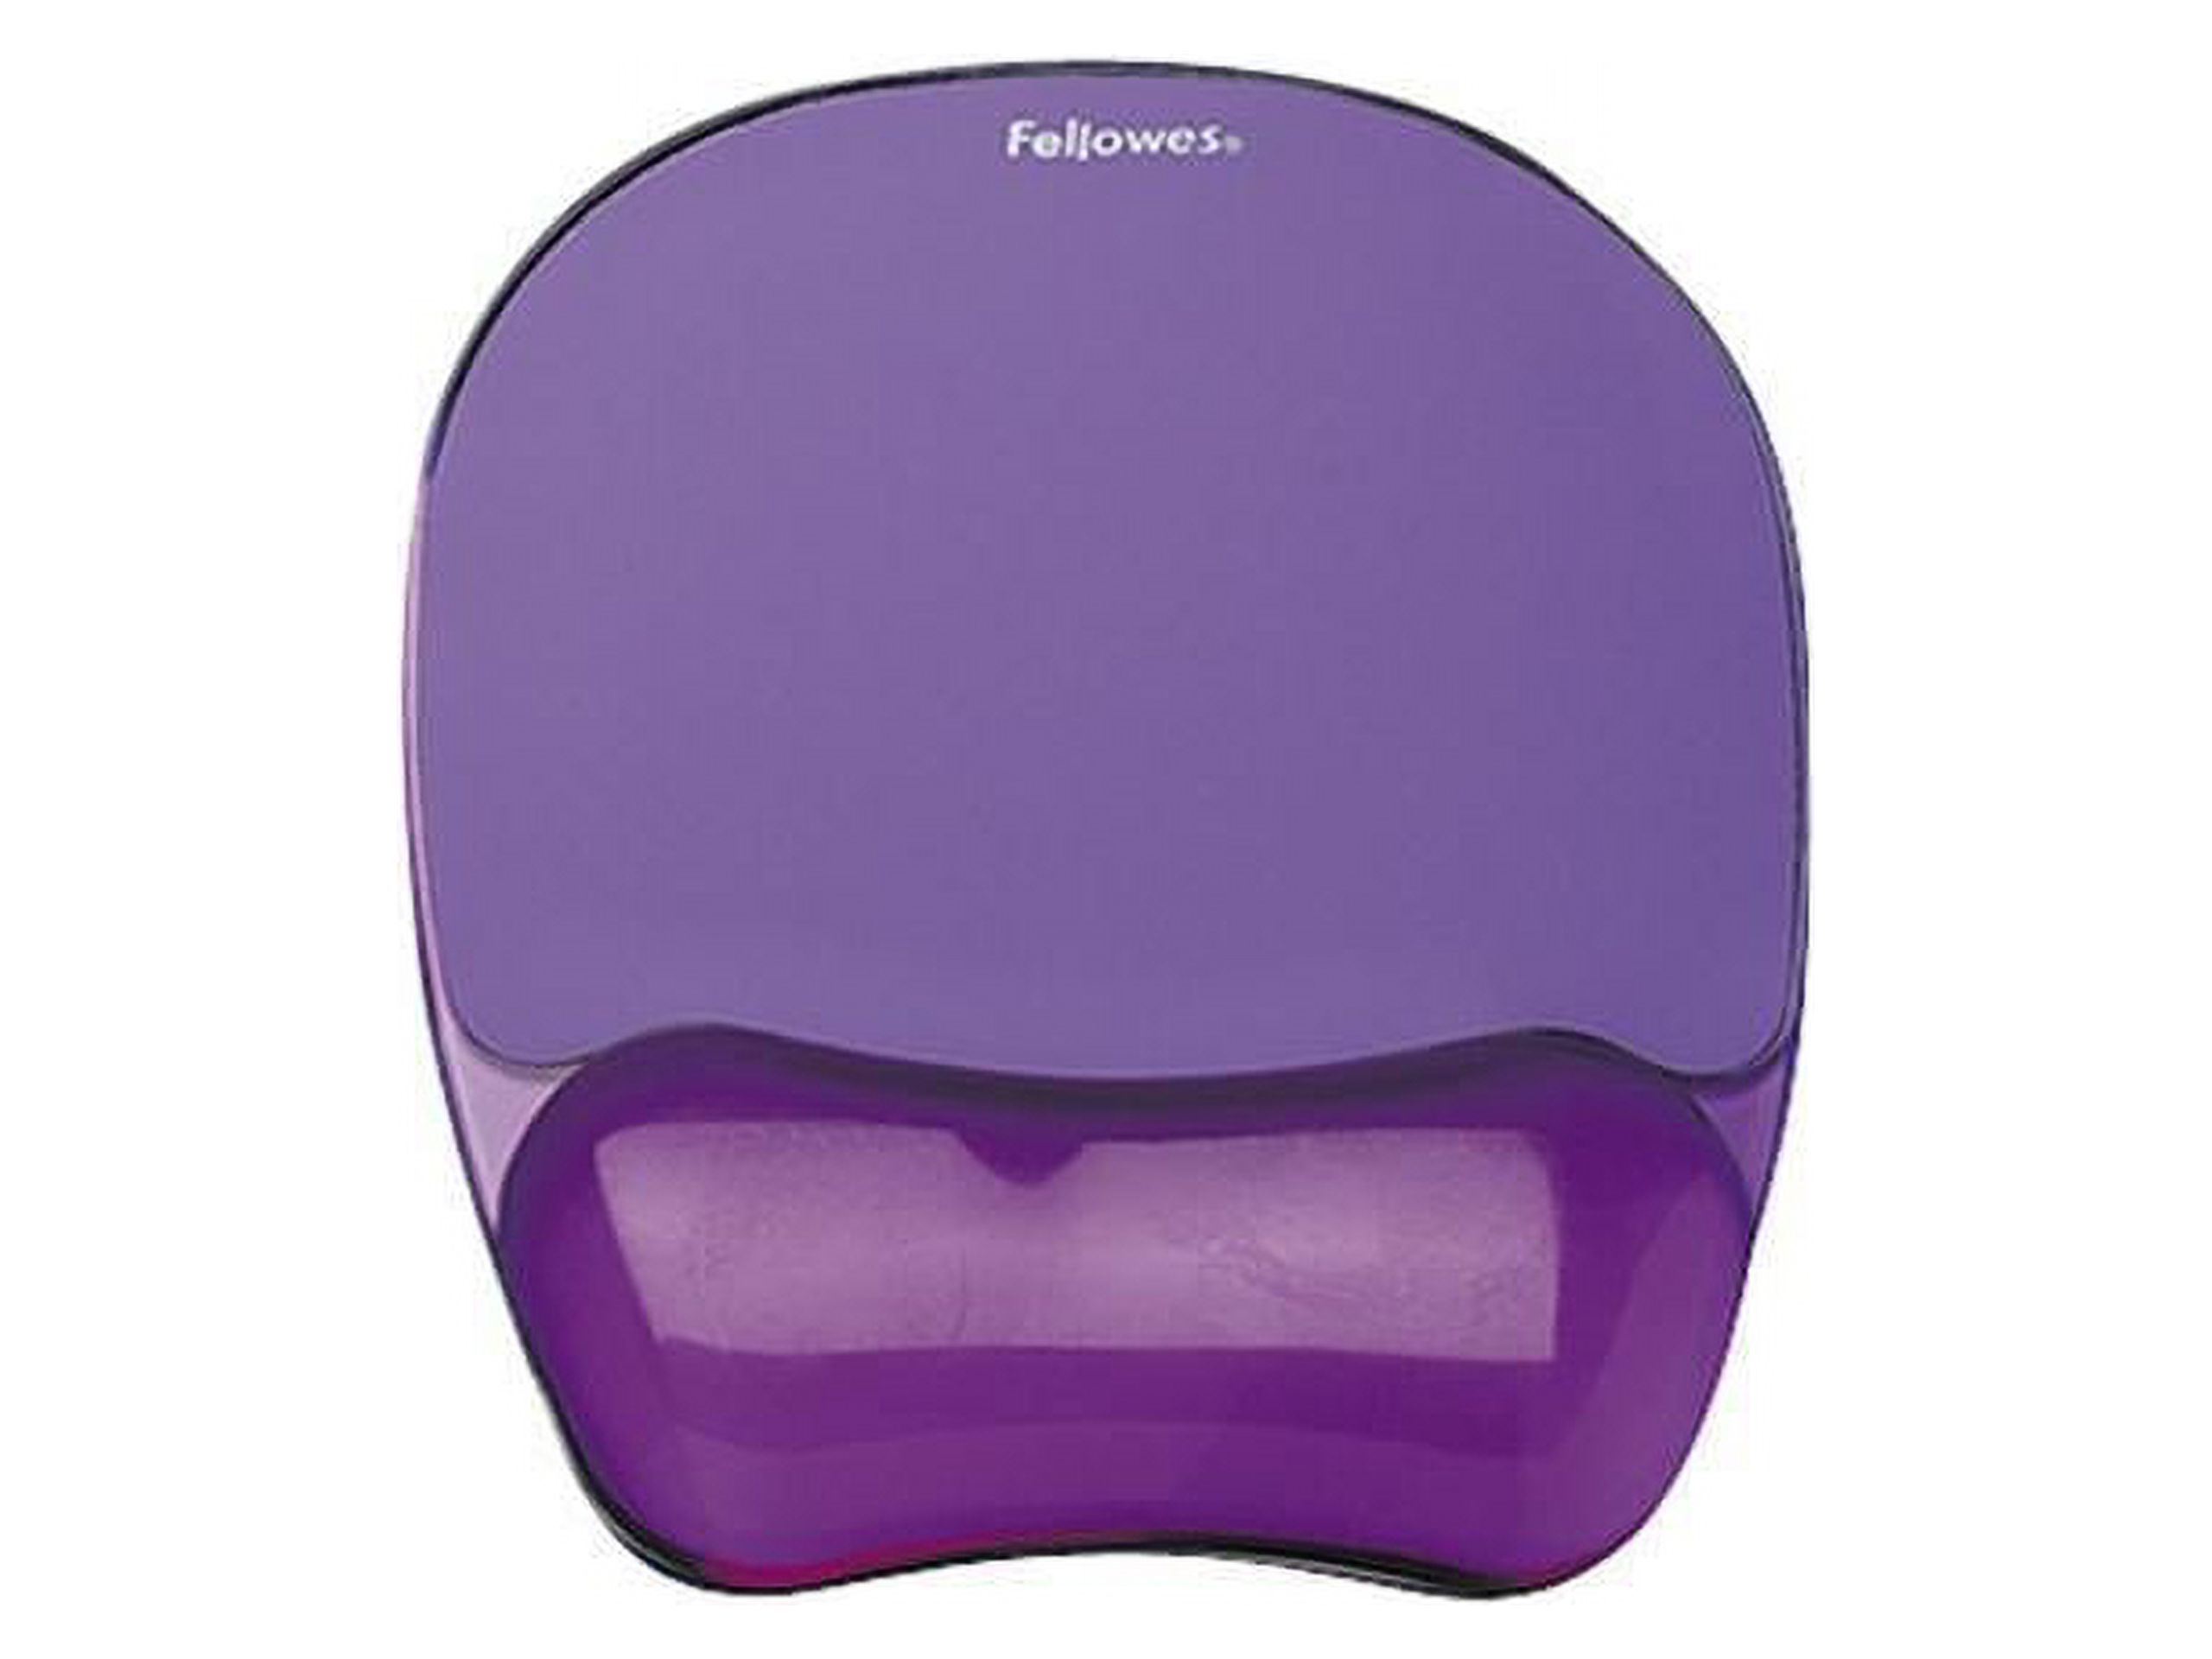 Fellowes 91441 Gel Crystals Mousepad/Wrist Rest - Purple - image 1 of 4